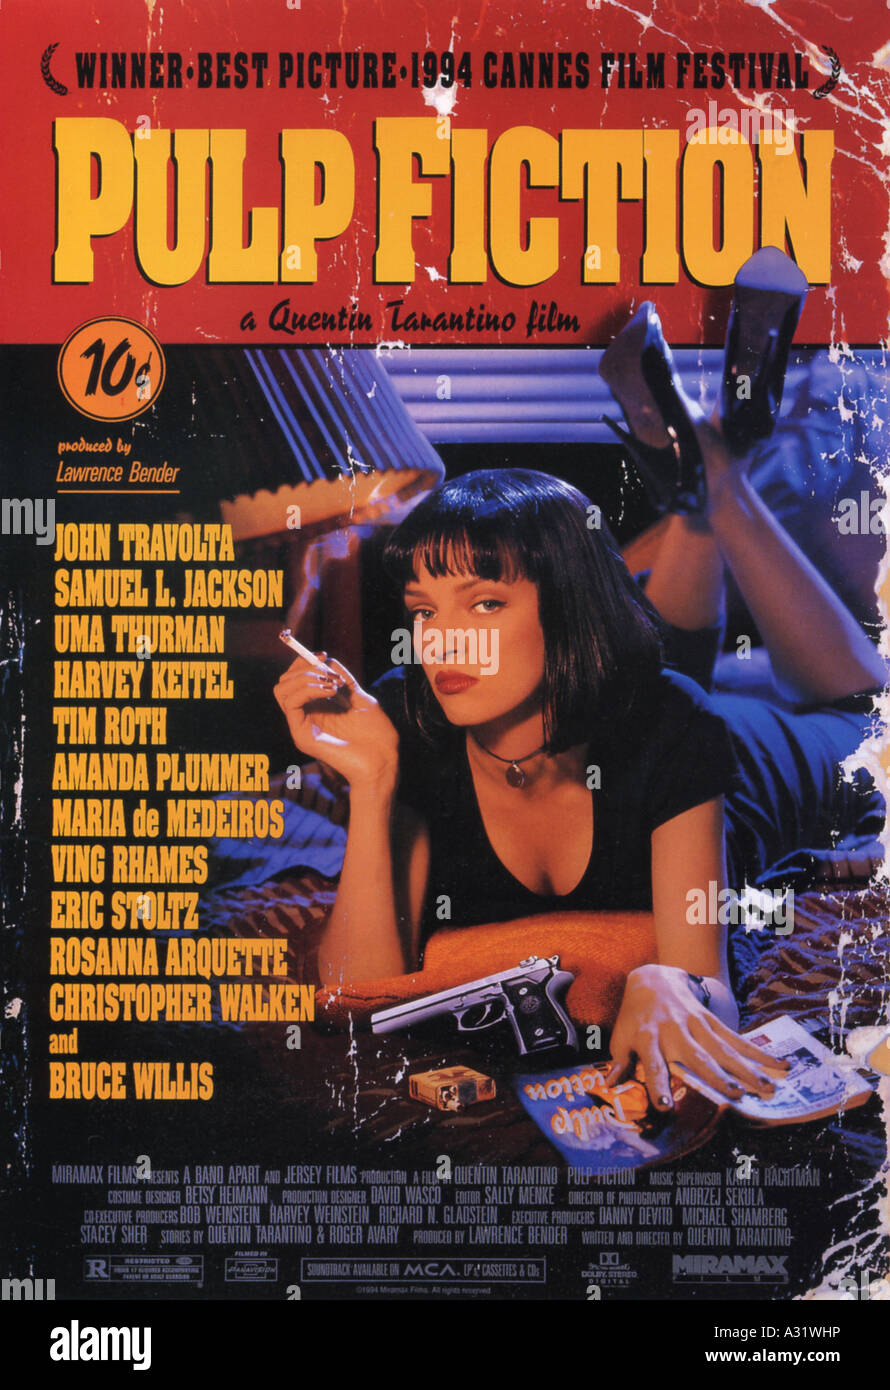 PULP FICTION poster for 1994 Buena Vista/Miramax film with Uma Thurman directed by Quentin Tarantino Stock Photo